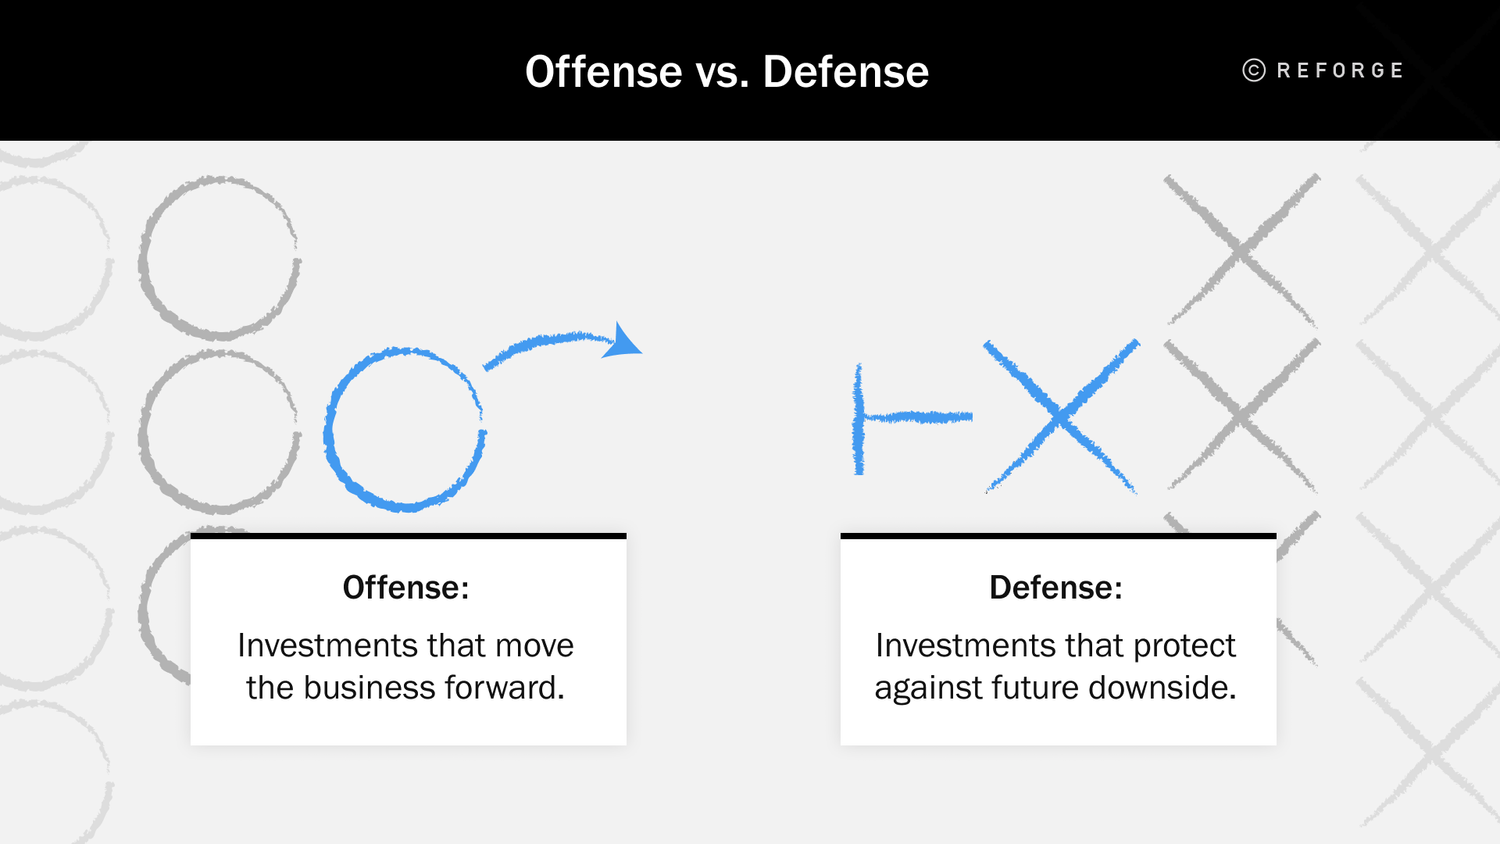 Product Strategy is Really About Offense vs. Defense